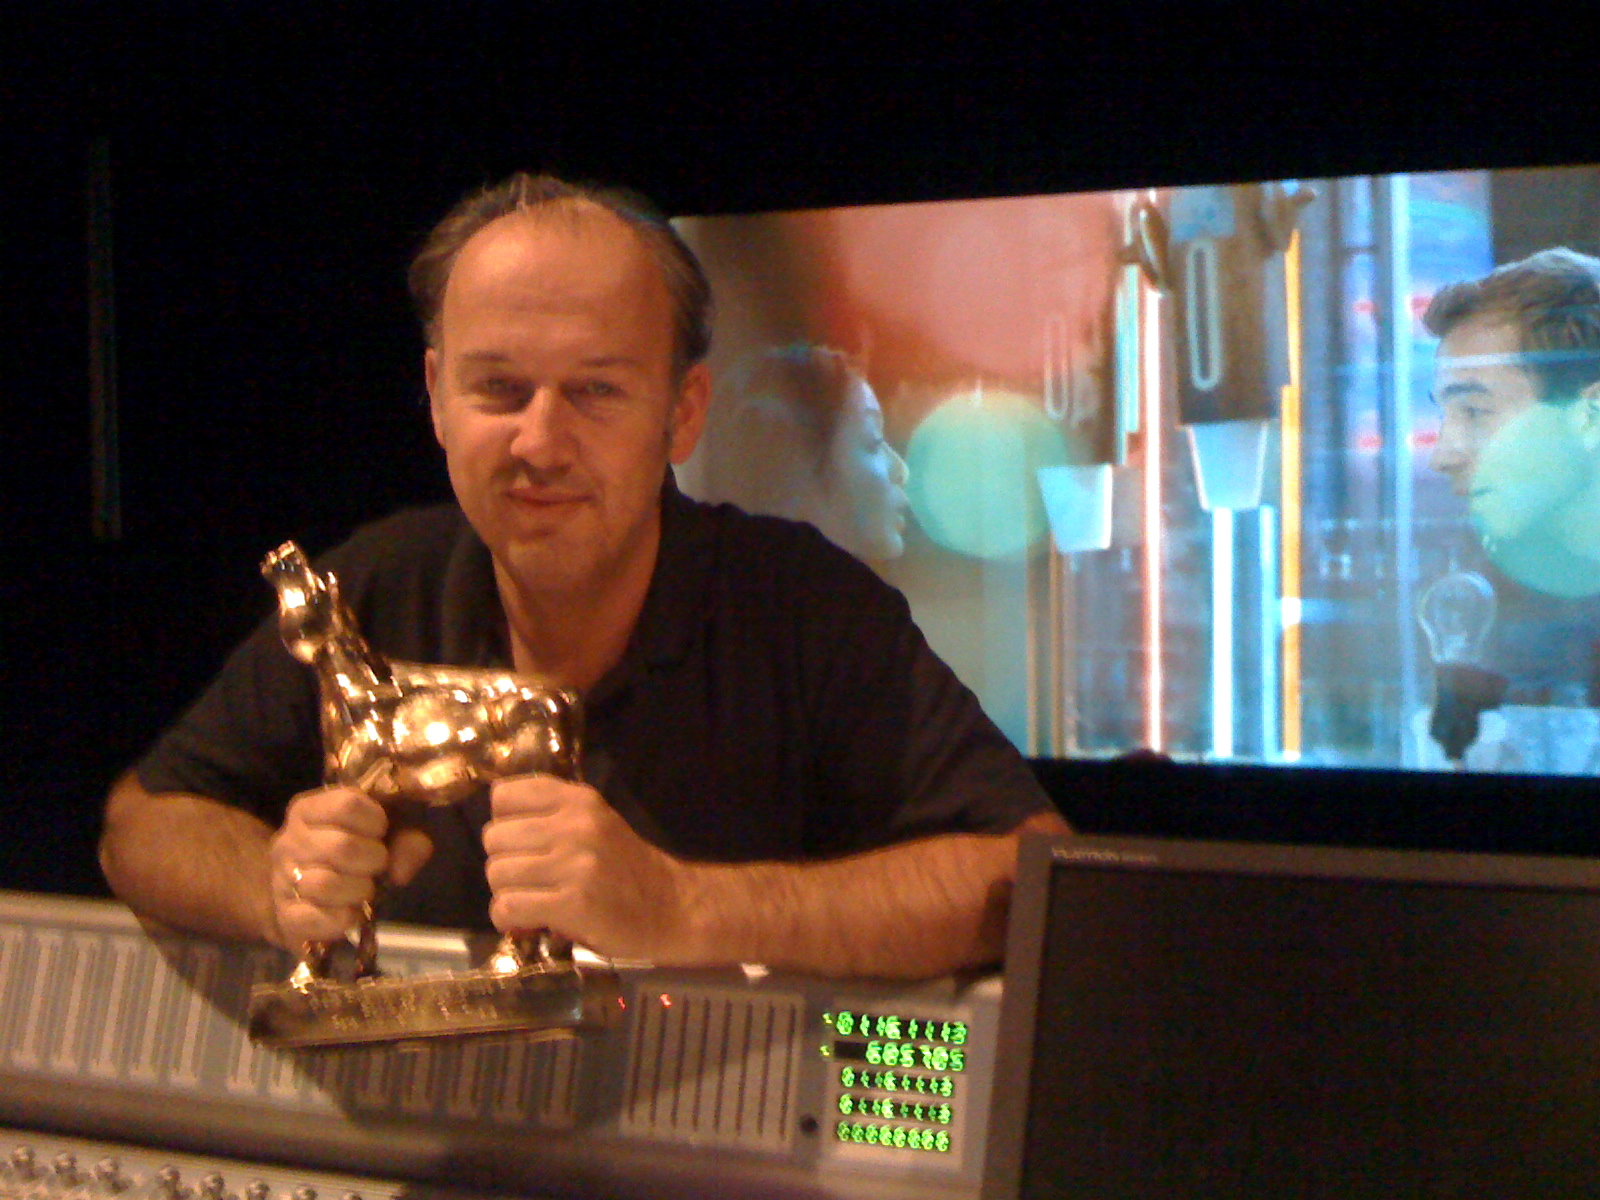 Peter Warnier with his golden calf best sound 2010 for RU There